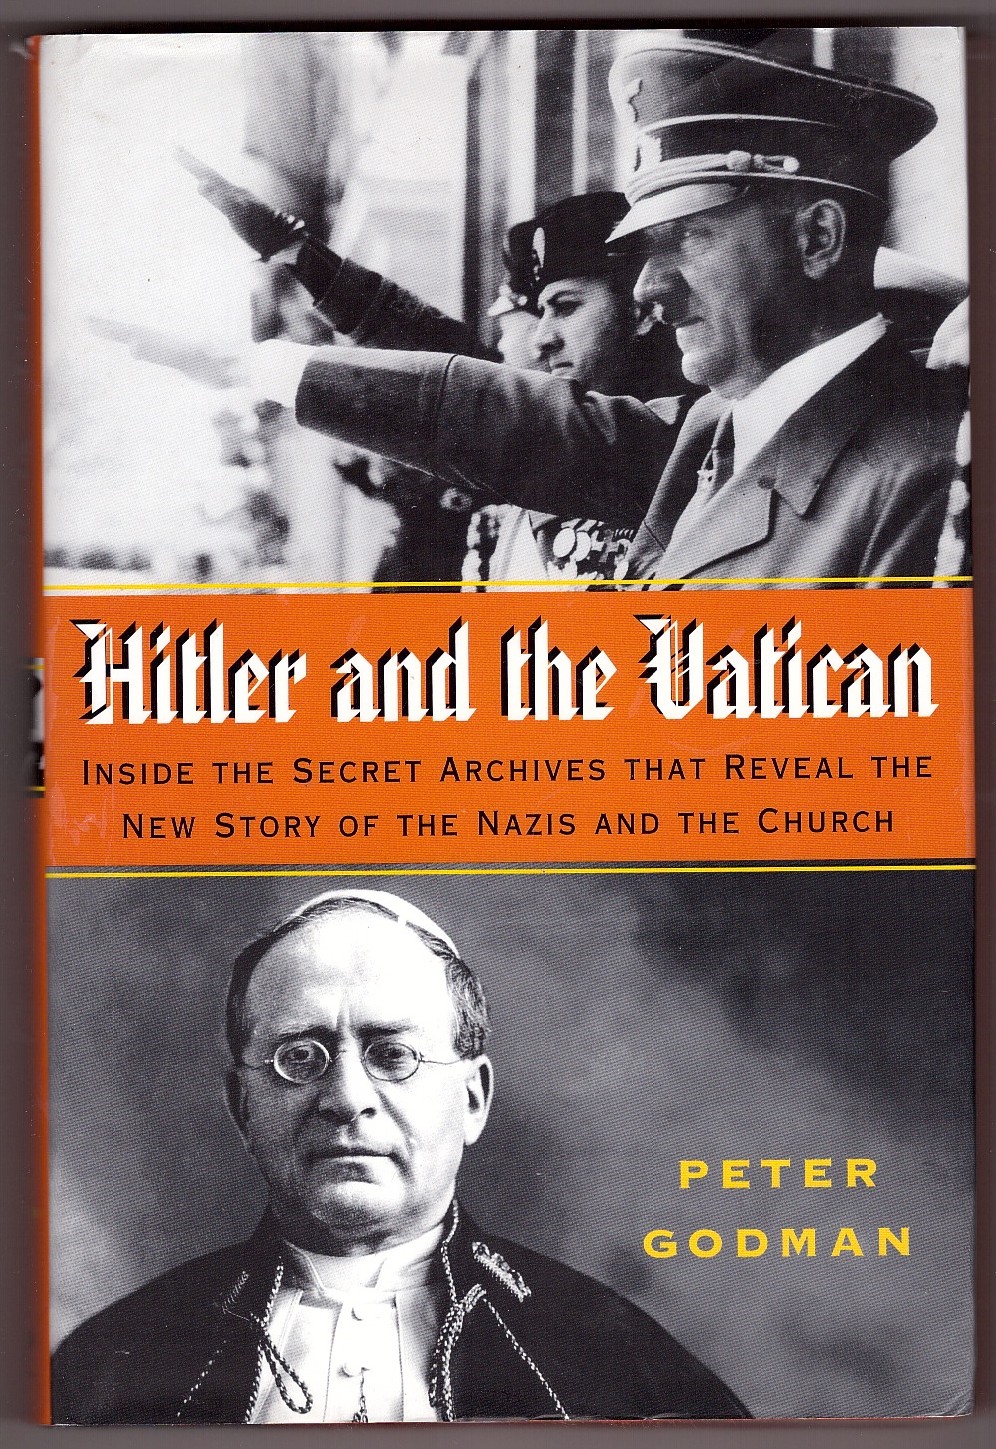 GODMAN, PETER - Hitler and the Vatican Inside the Secret Archives That Reveal the New Story of the Nazis and the Church